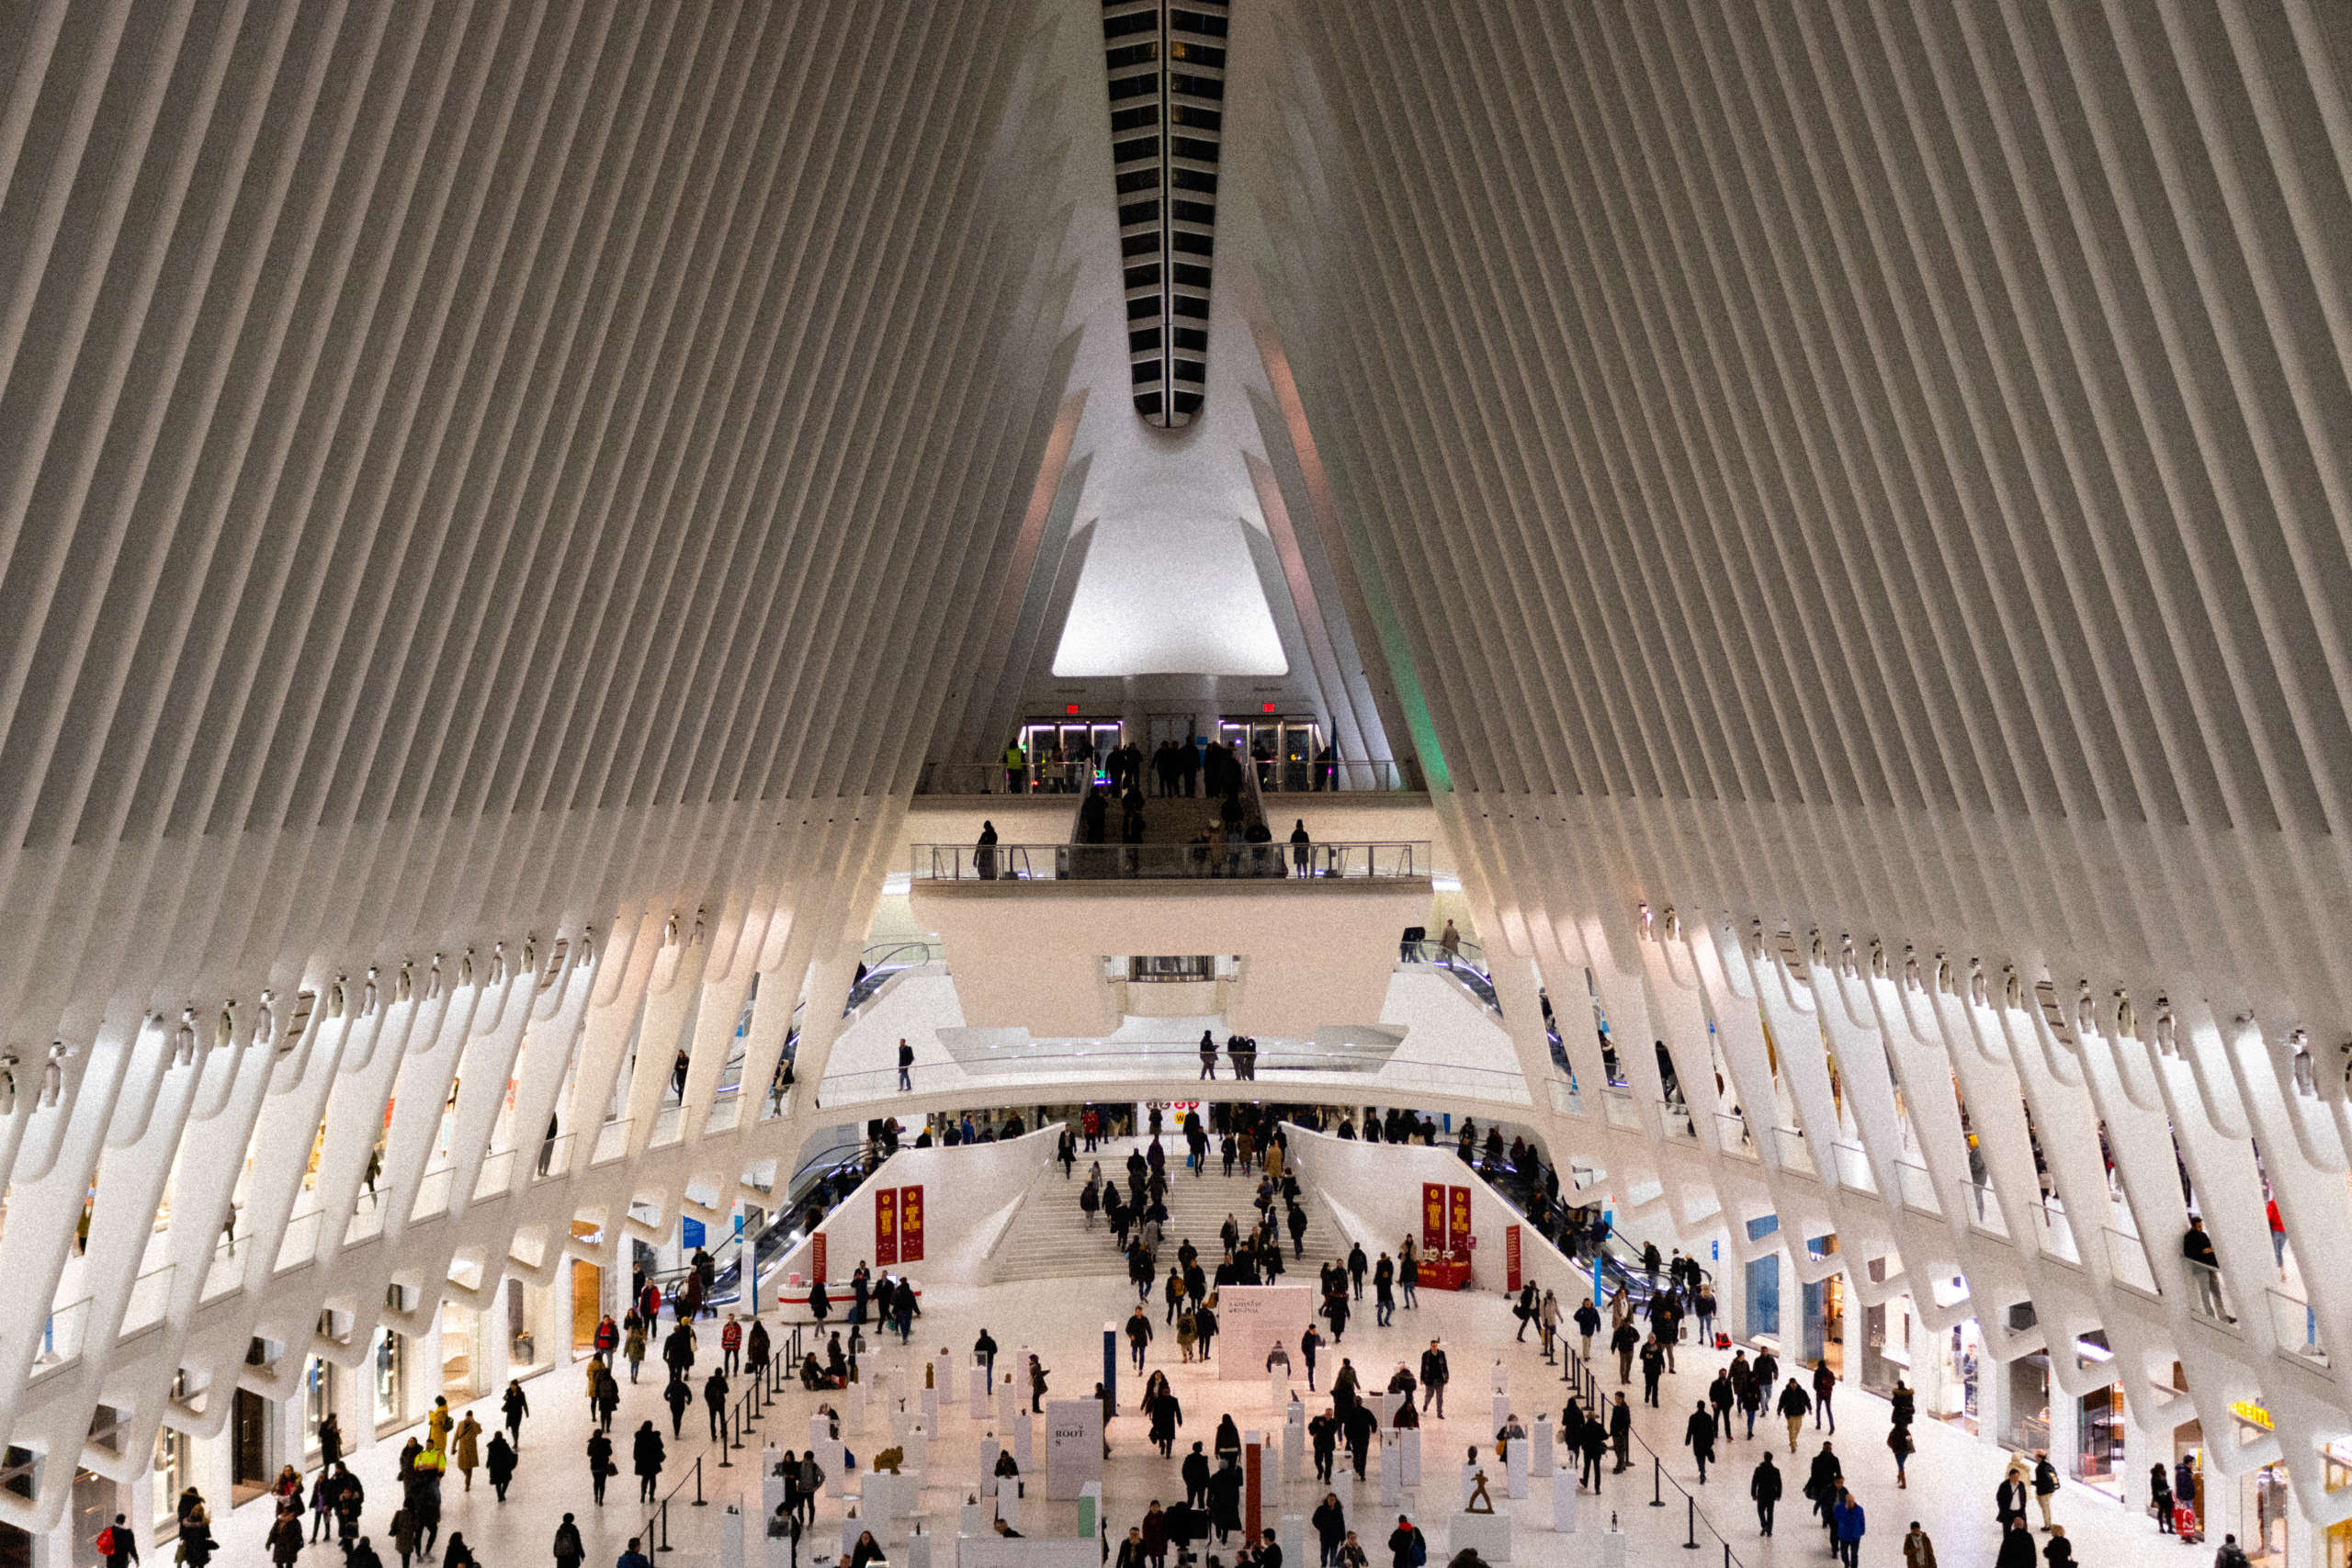 People wander the Oculus at the World Trade Center